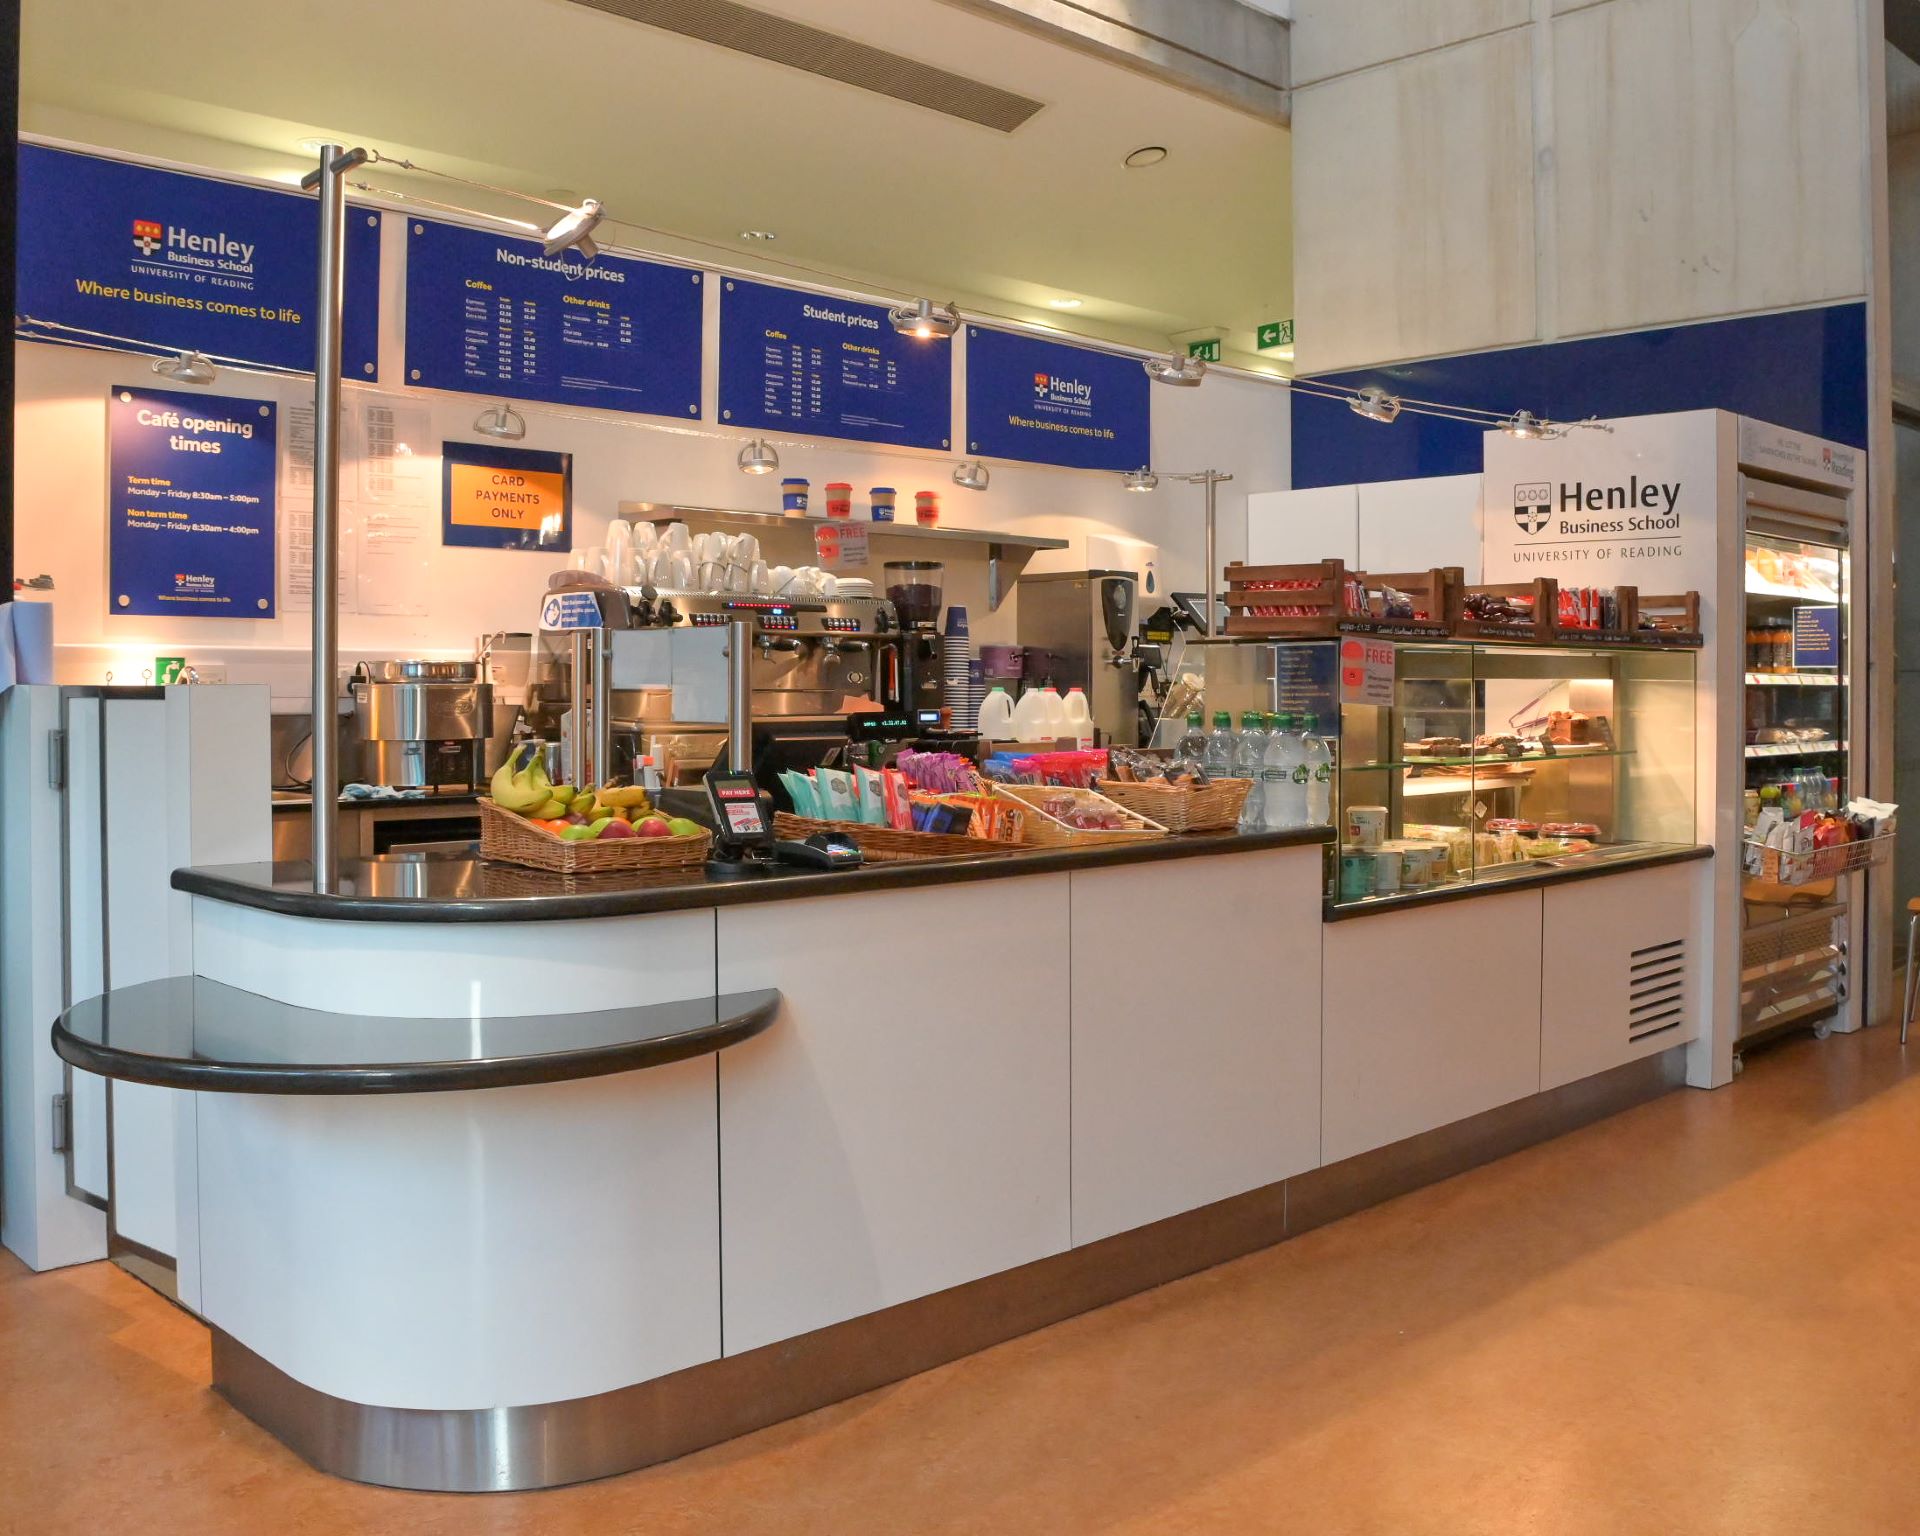 A photo of Henley Business School cafe